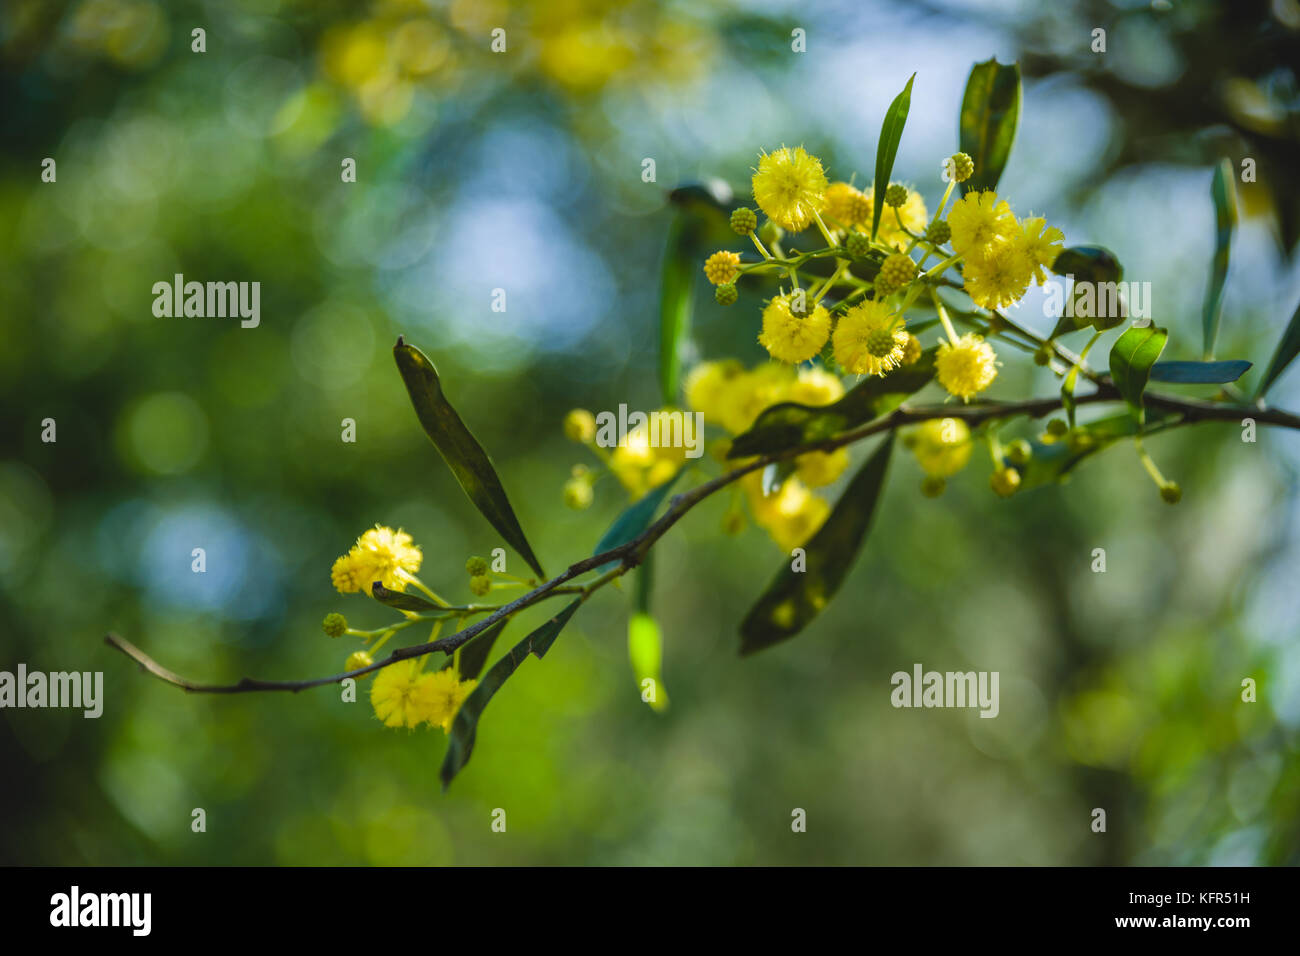 close-up picture of a yellow blossoming branch during spring with green leaves Stock Photo